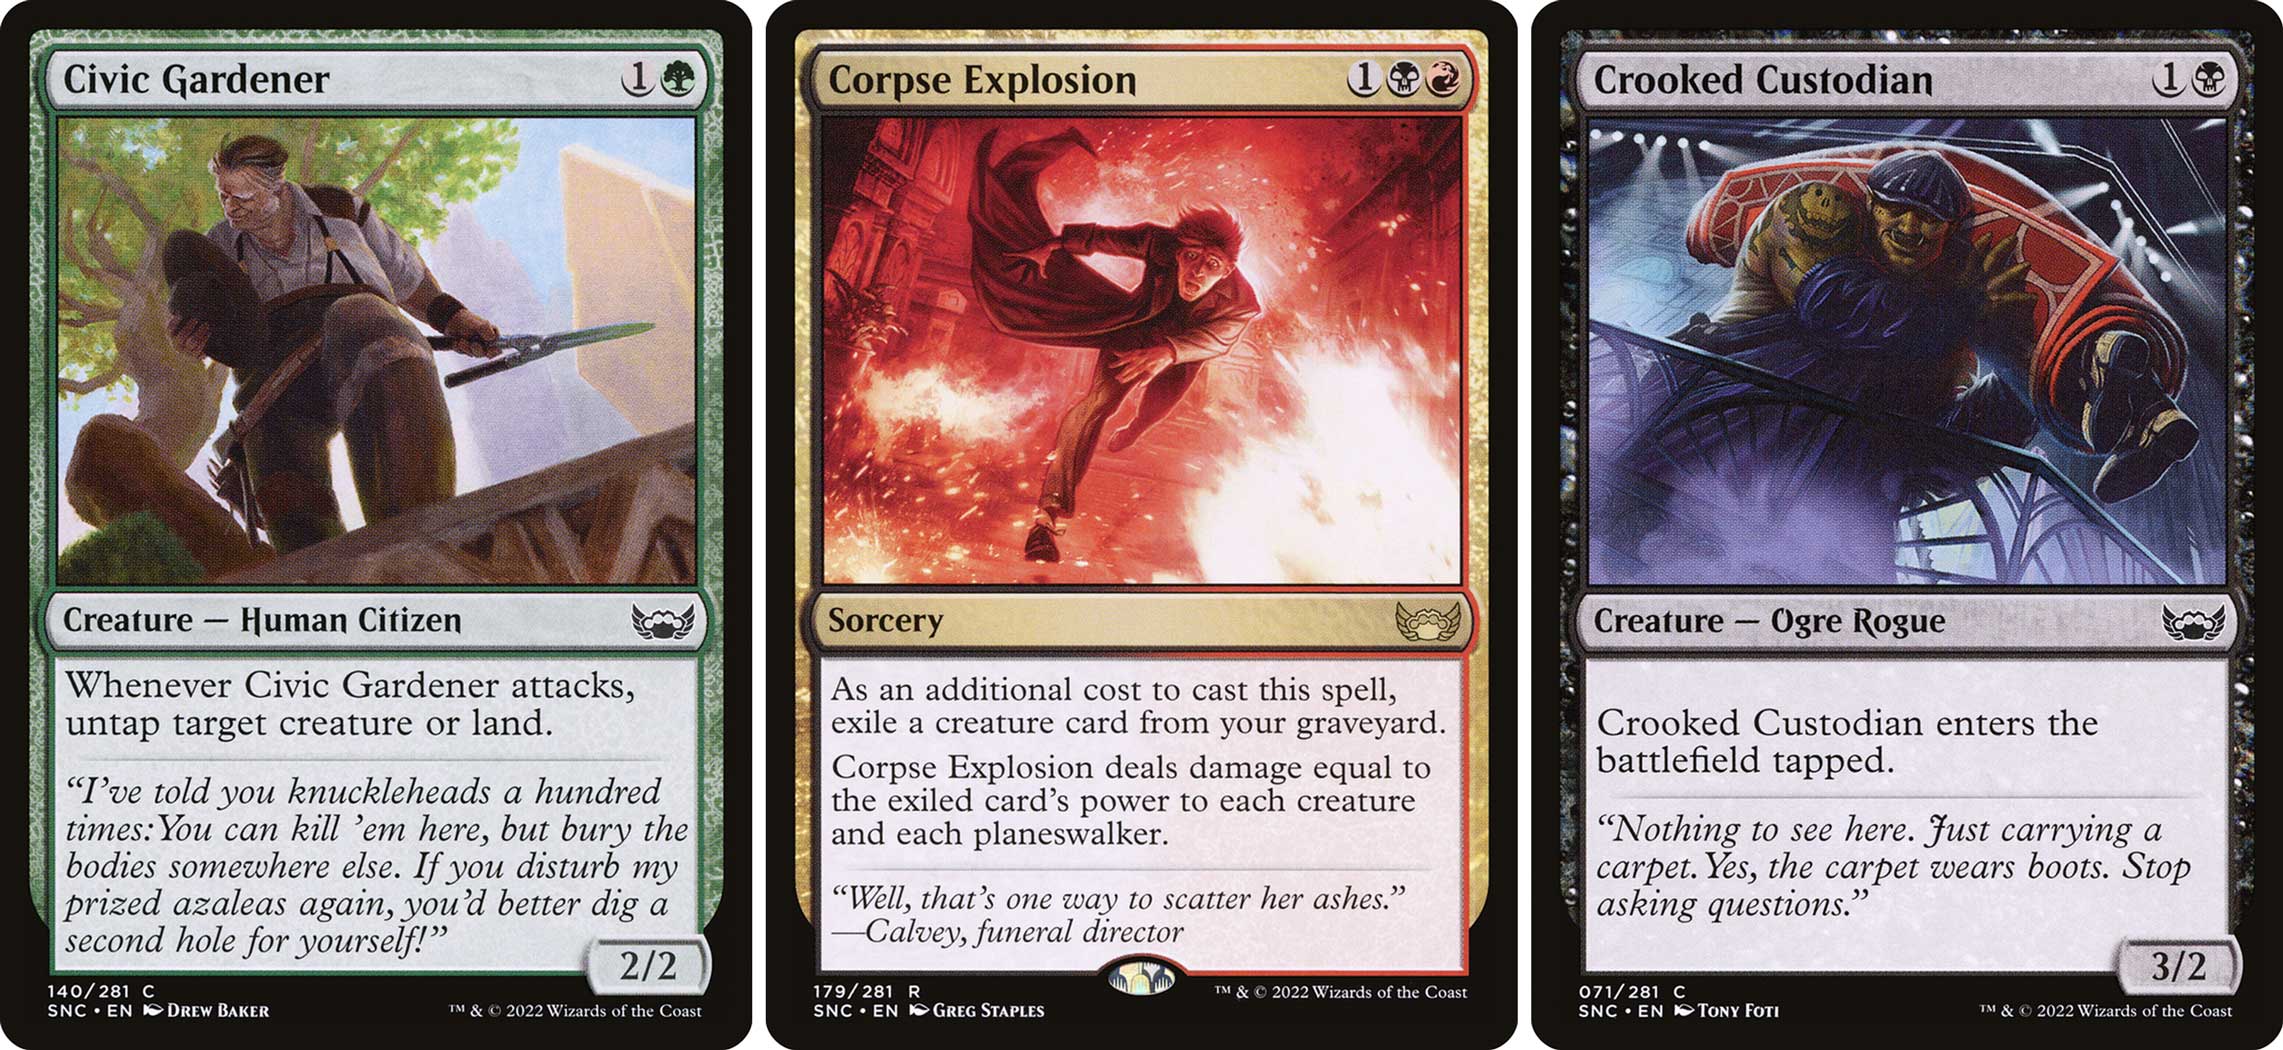 CARD IMAGES (all Streets of New Capenna regular versions): Civic Gardener; Corpse Explosion; Crooked Custodian